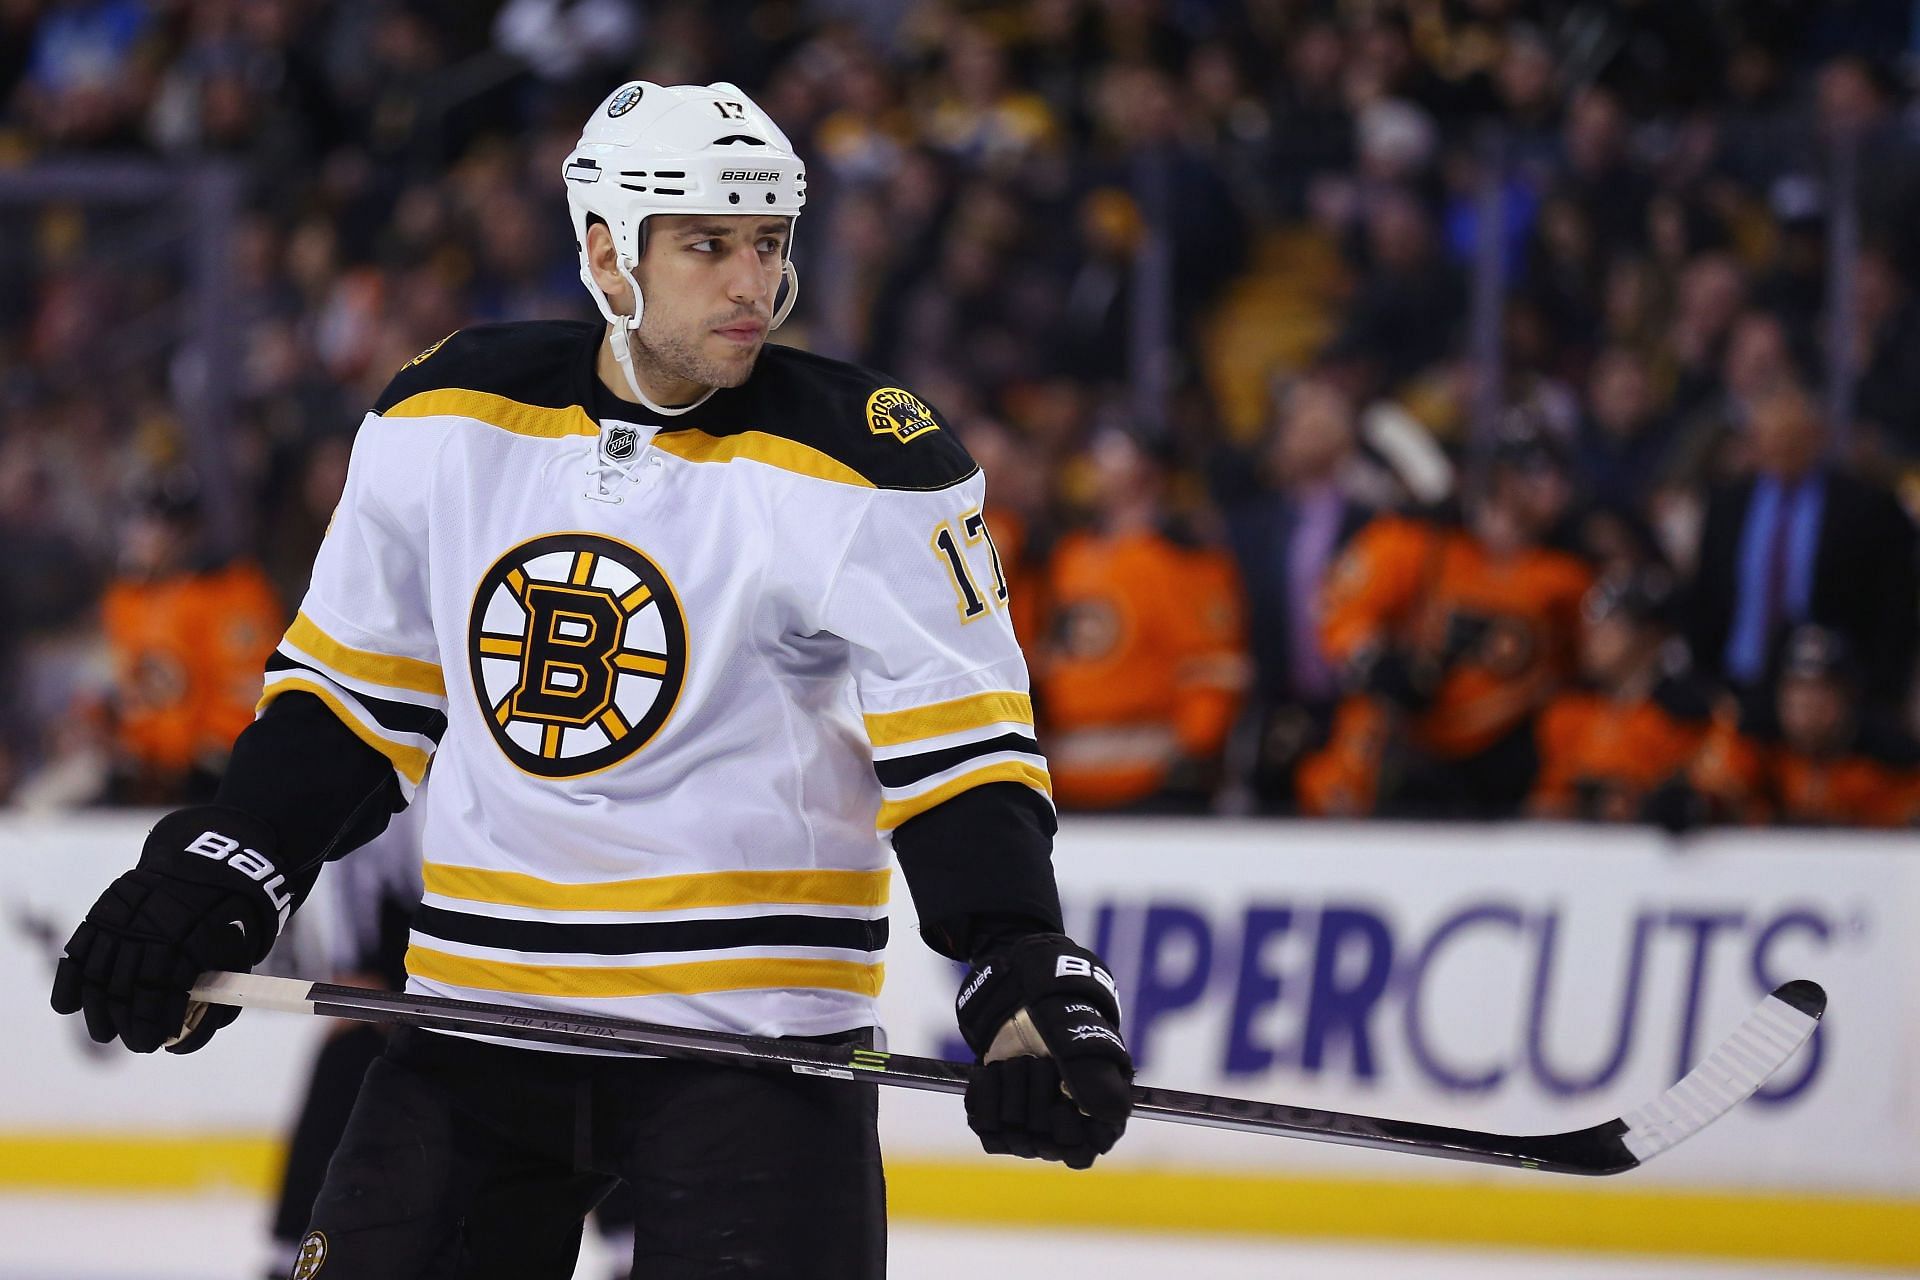 Lucic is playing for the Boston Bruins.